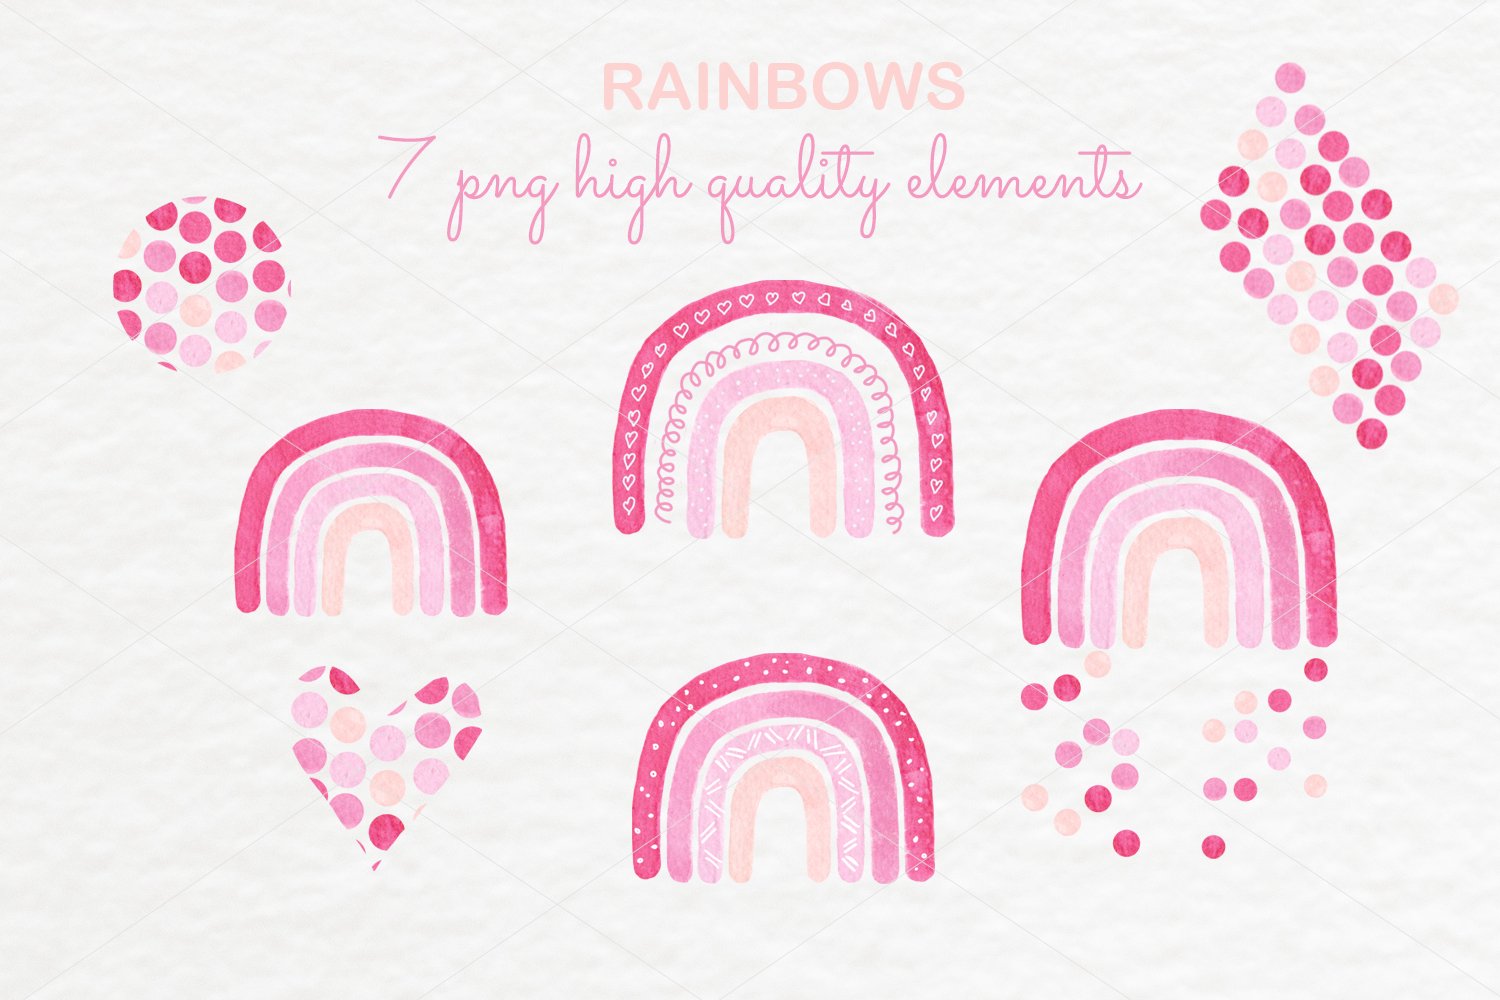 Watercolor rainbow clipart patterns preview image.